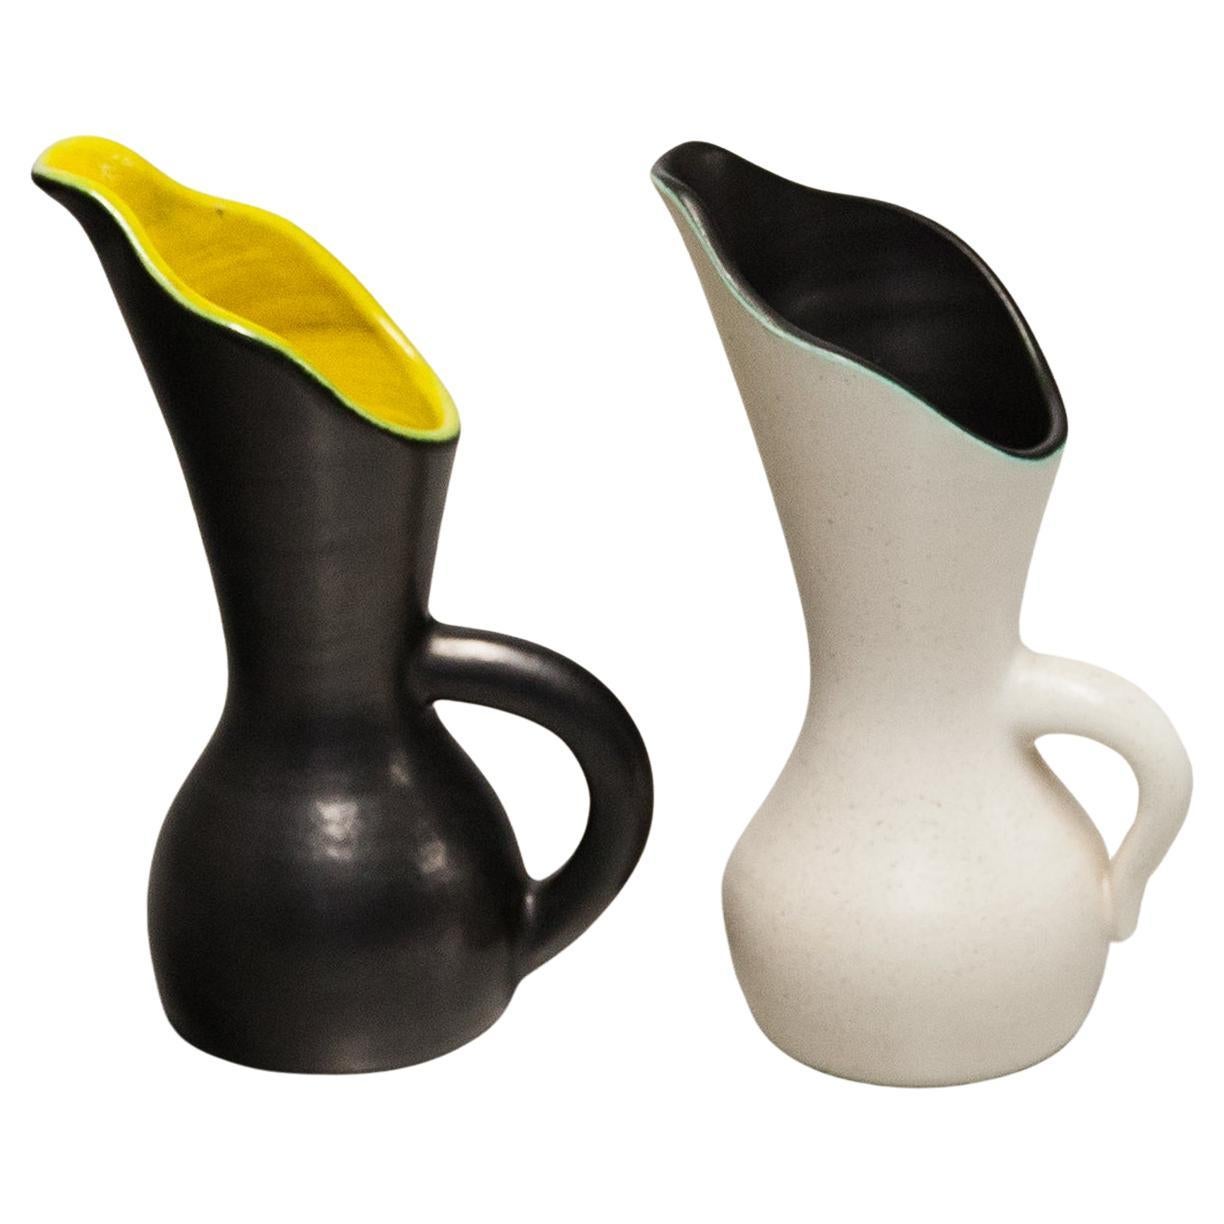 Pol Chambost Ceramic Pitcher Set of 2 For Sale